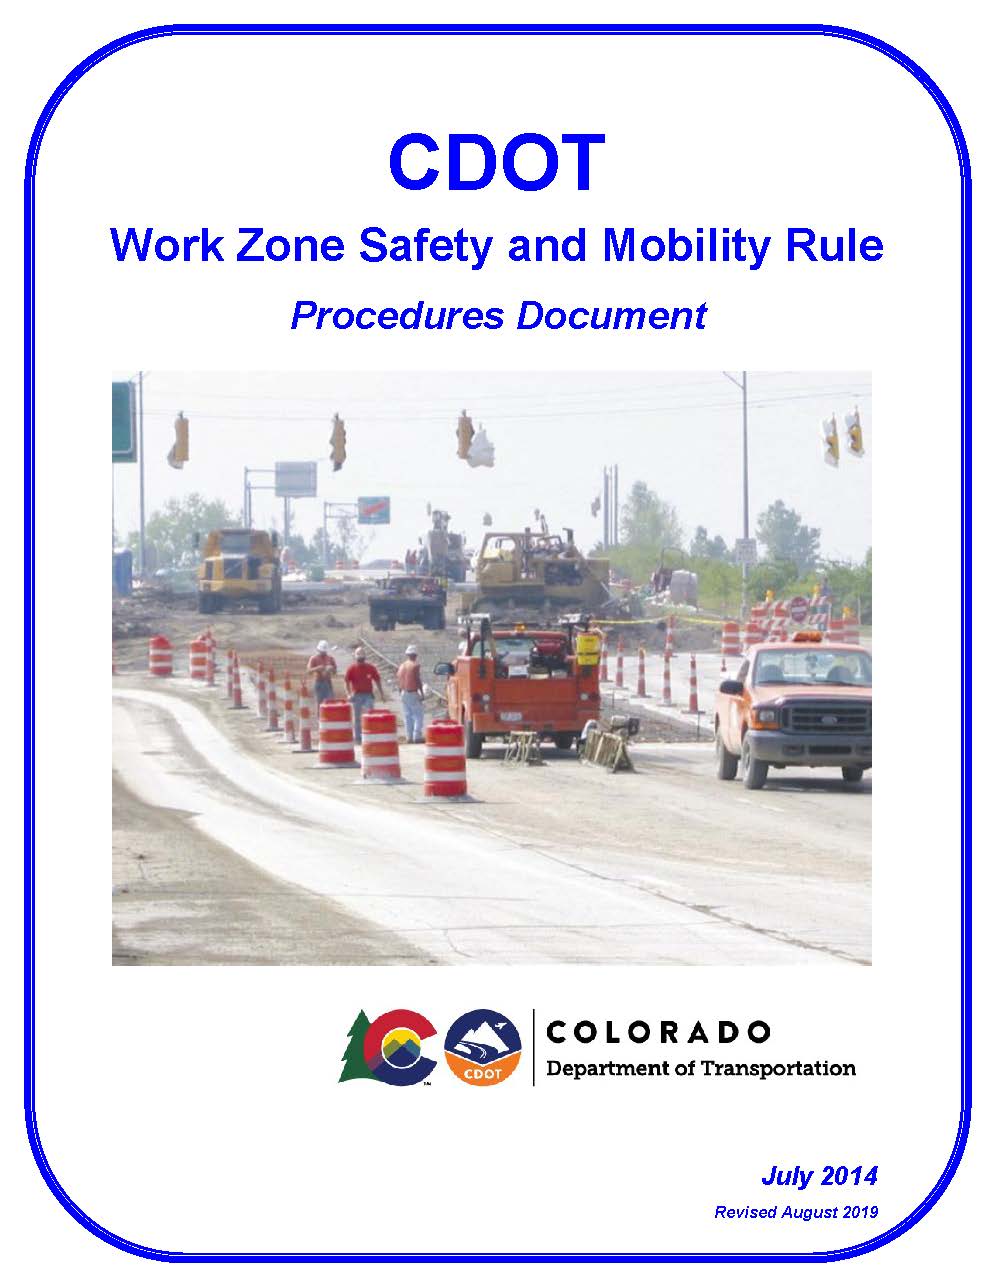 Work Zone Safety and Mobility Procedures detail image